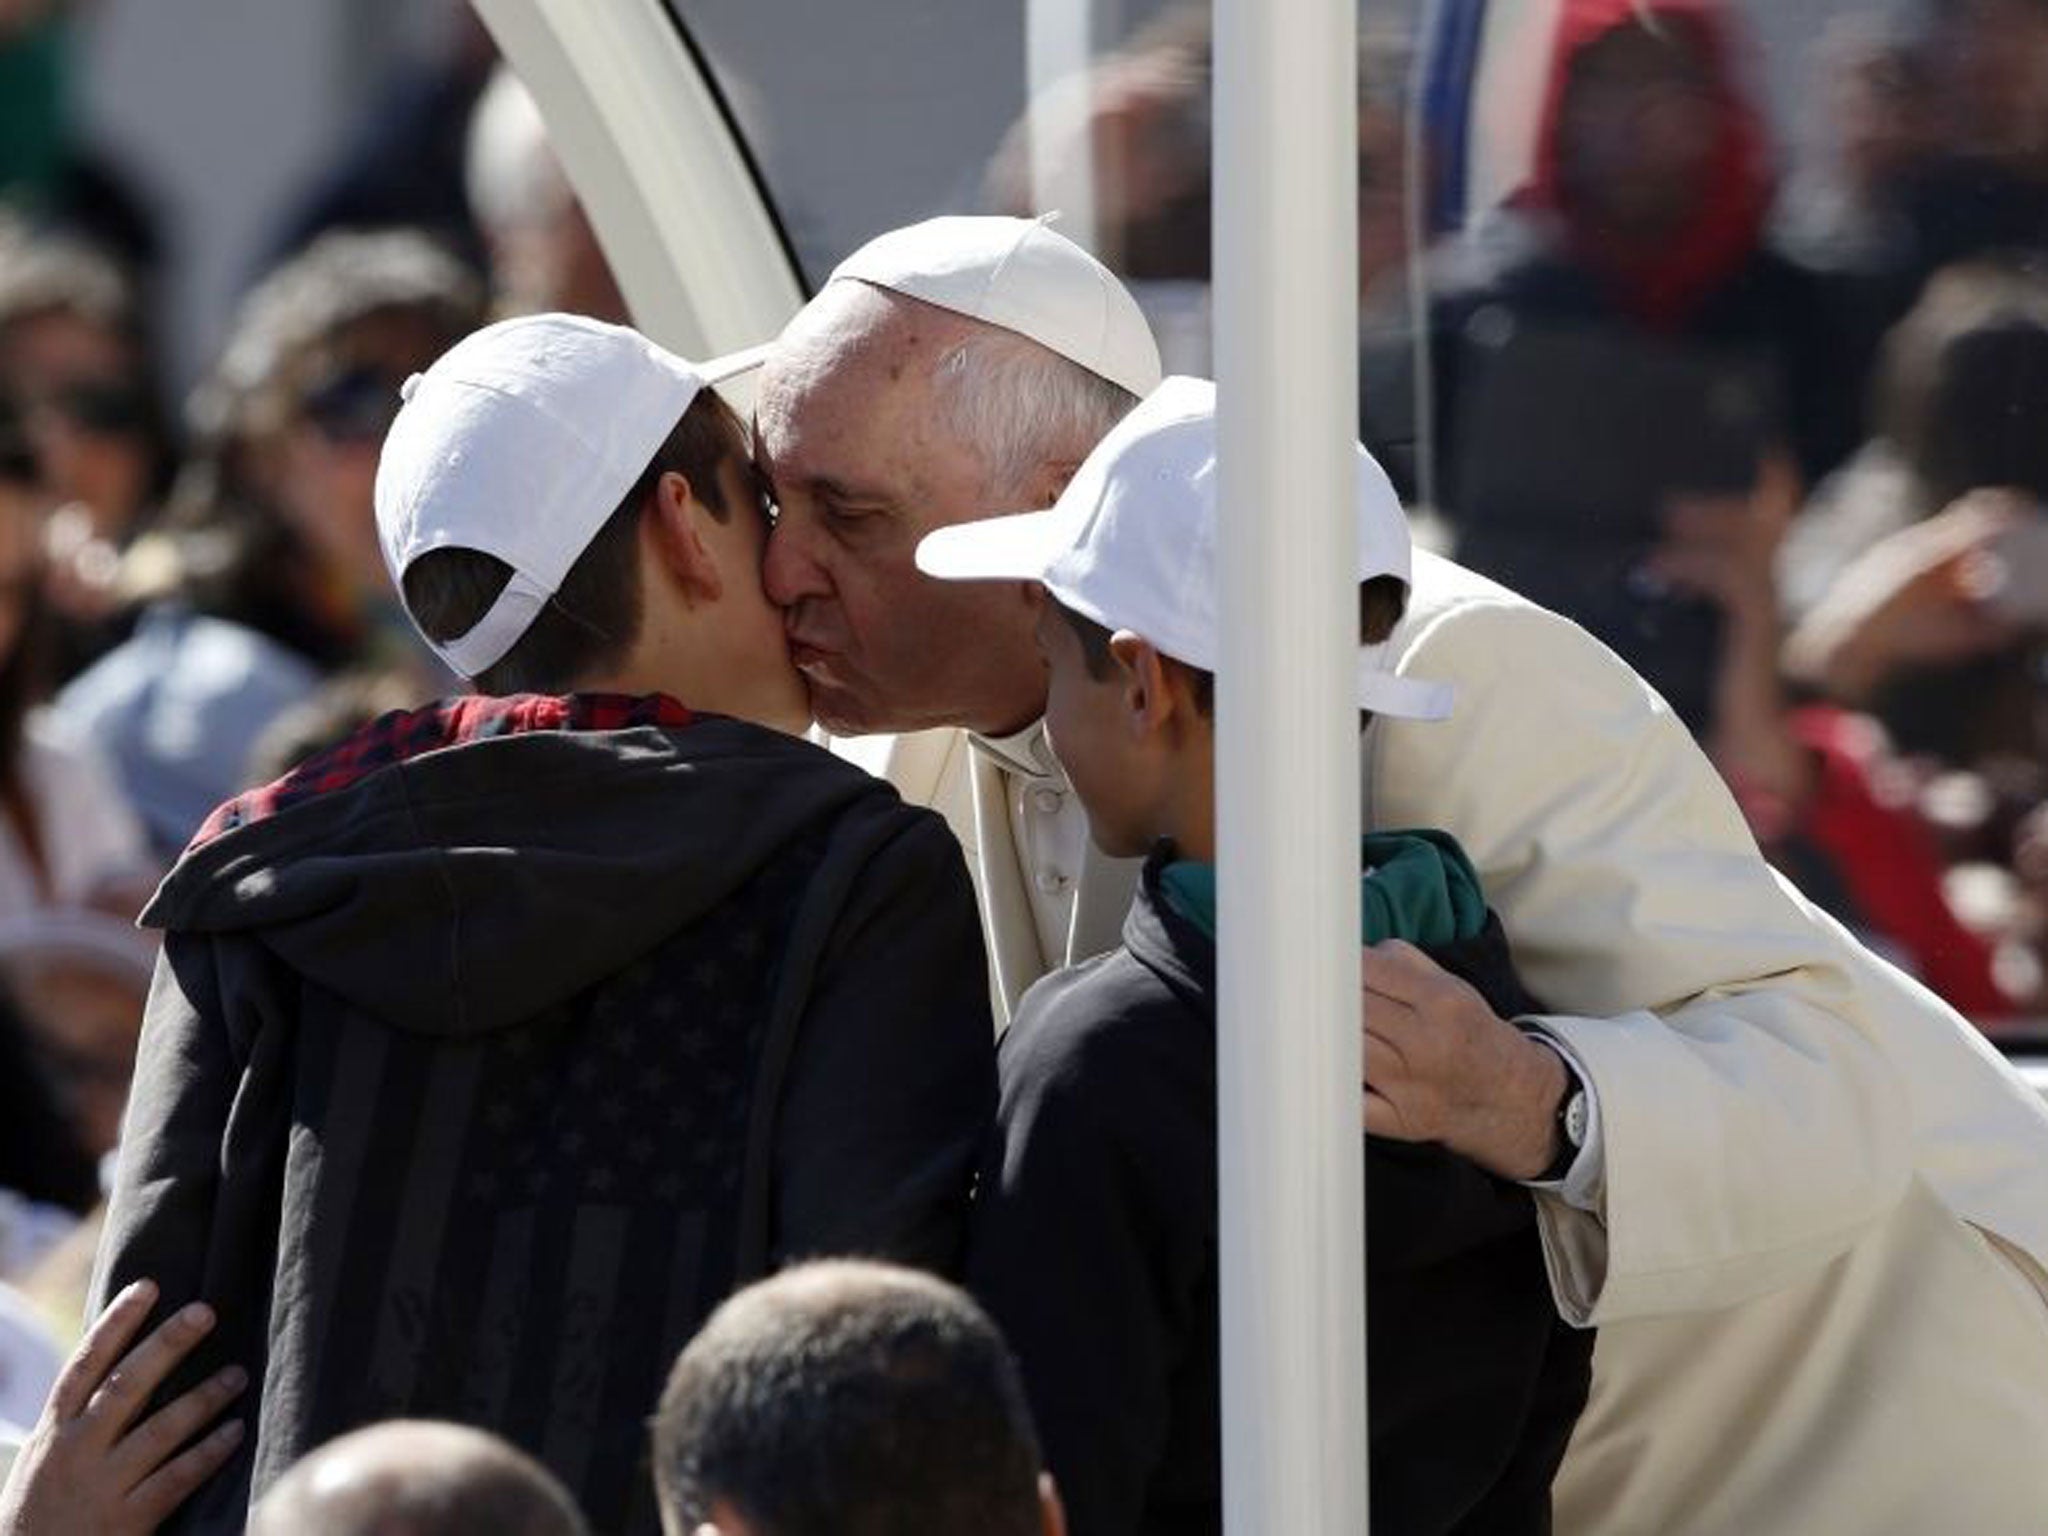 Pope Francis welcomes the Perugian boys onto his Popemobile with a kiss 